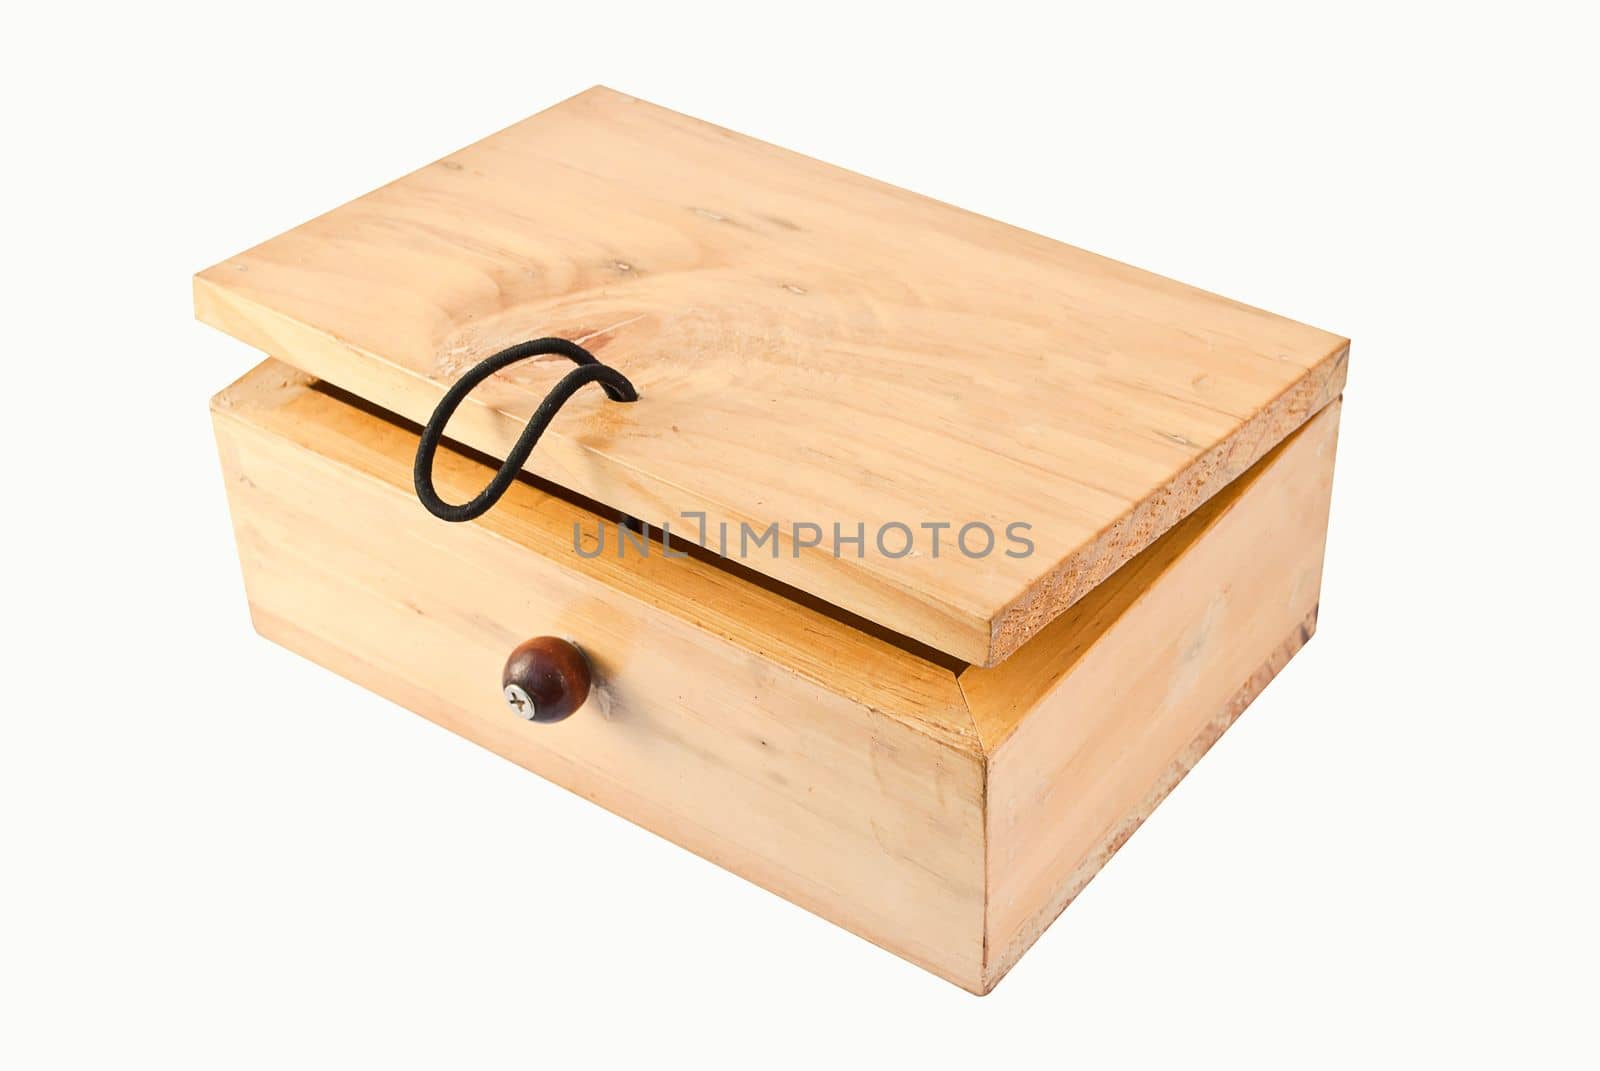 Wooden box on white background